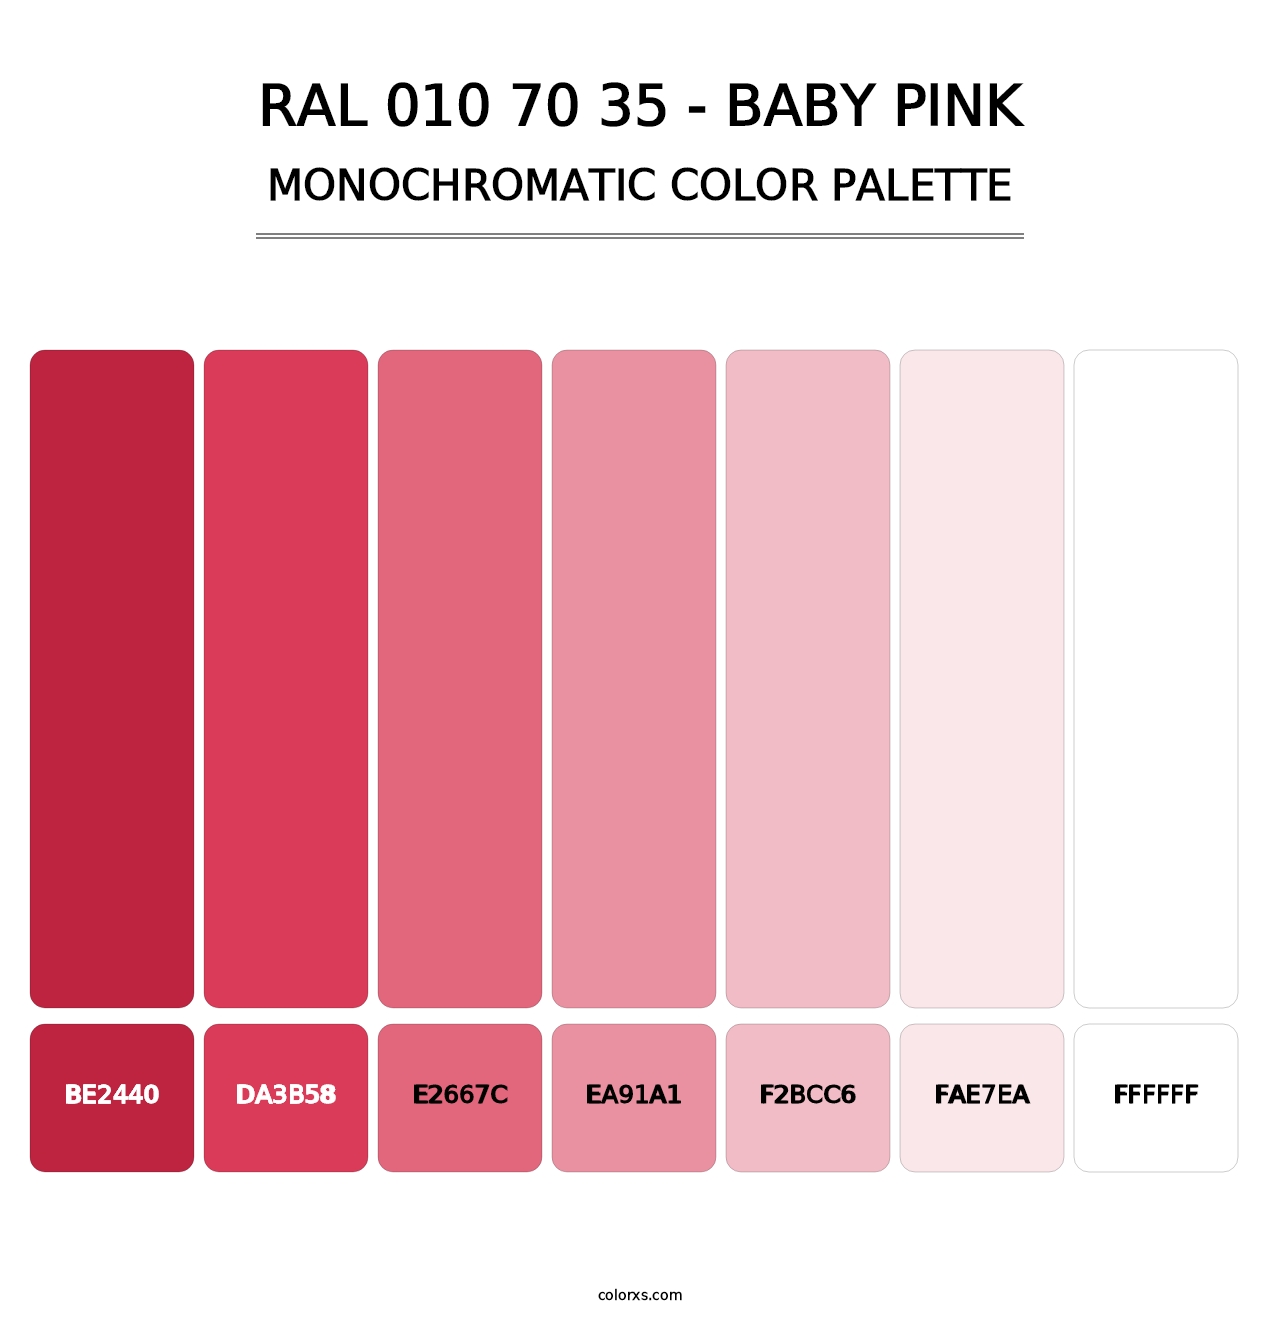 RAL 010 70 35 - Baby Pink - Monochromatic Color Palette